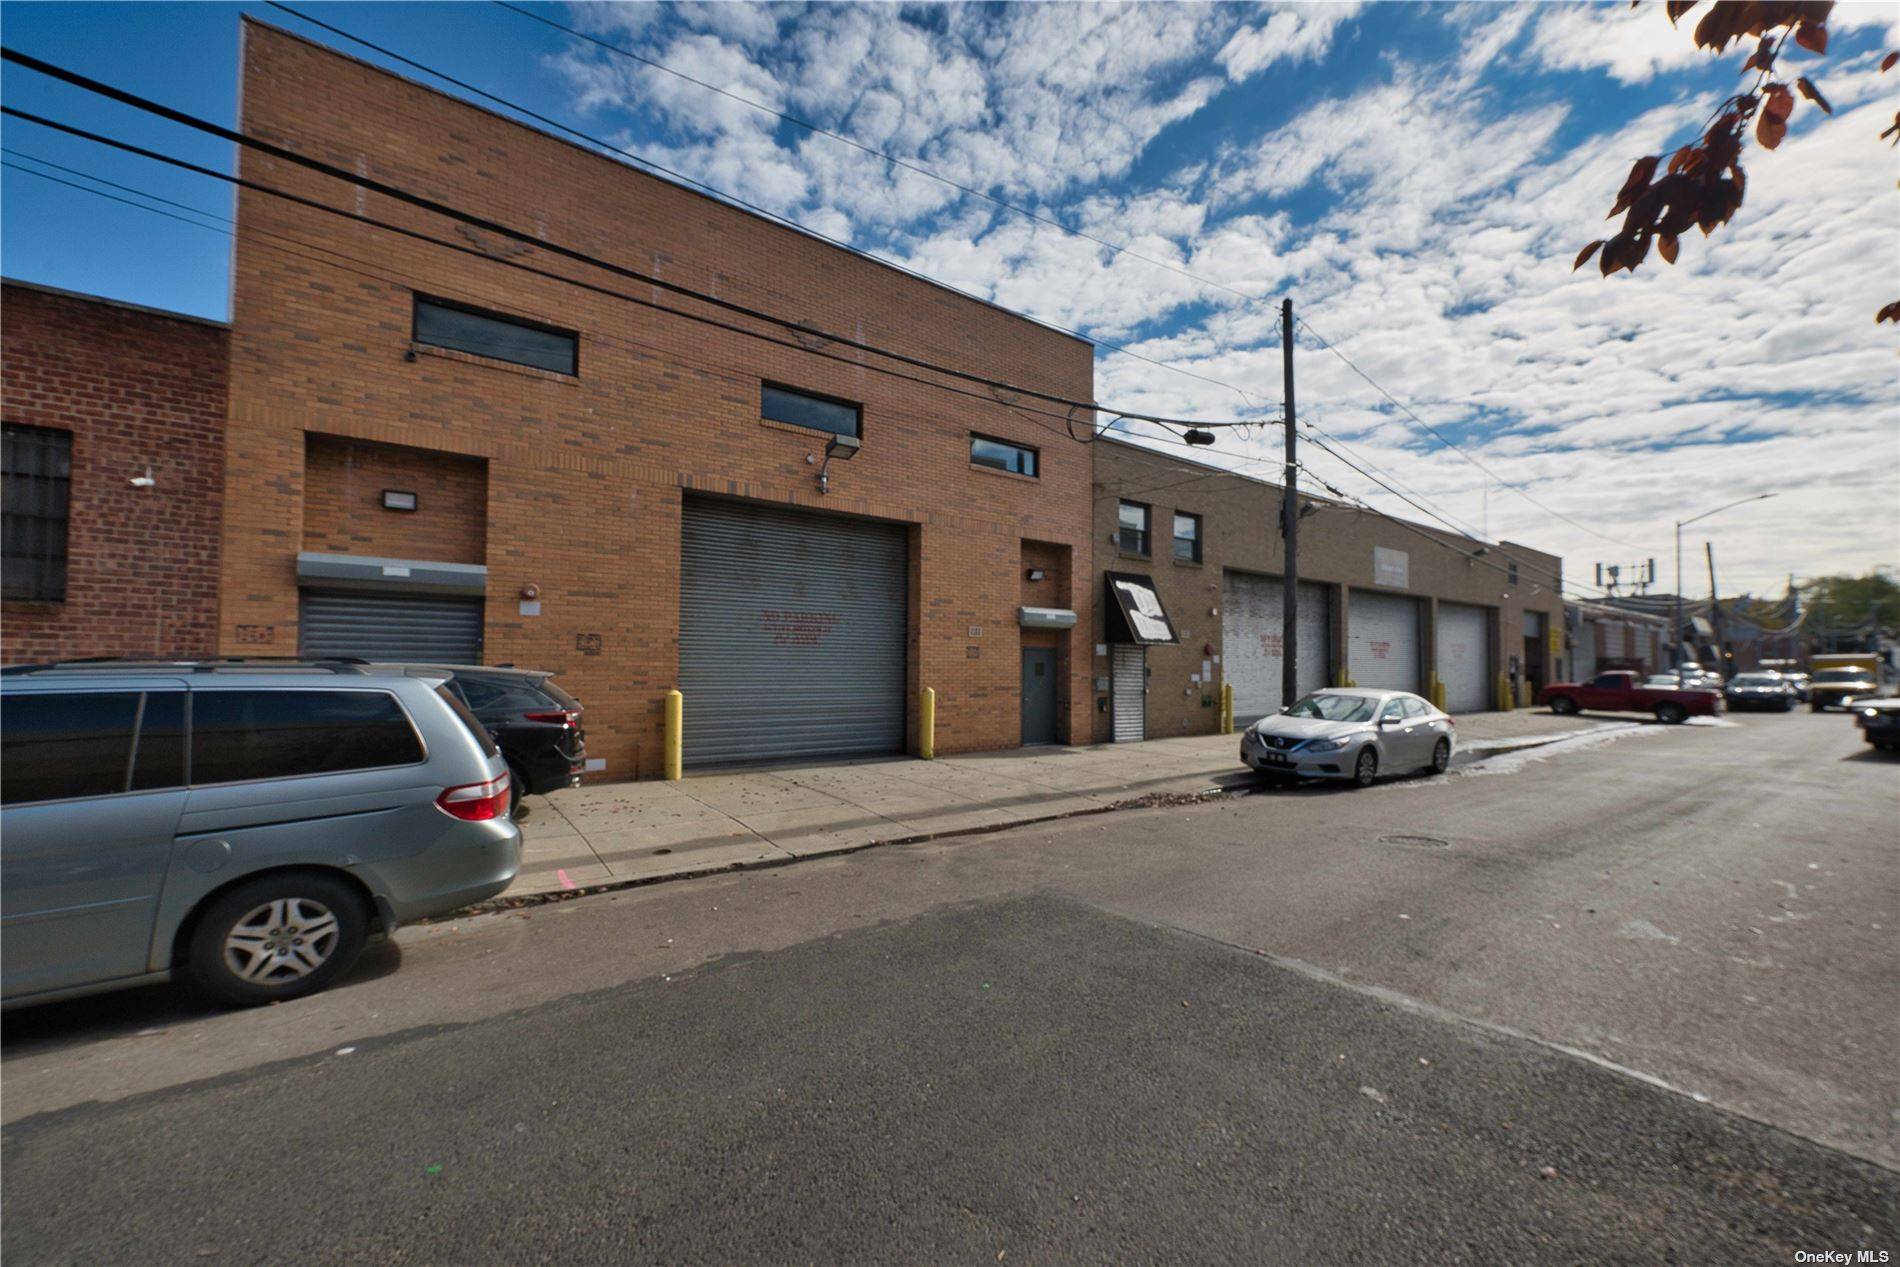 50 15 50 19 69th Pl, Woodside, NY 11377 is a spacious industrial property that offers a generous 12, 250 square feet of warehouse space.